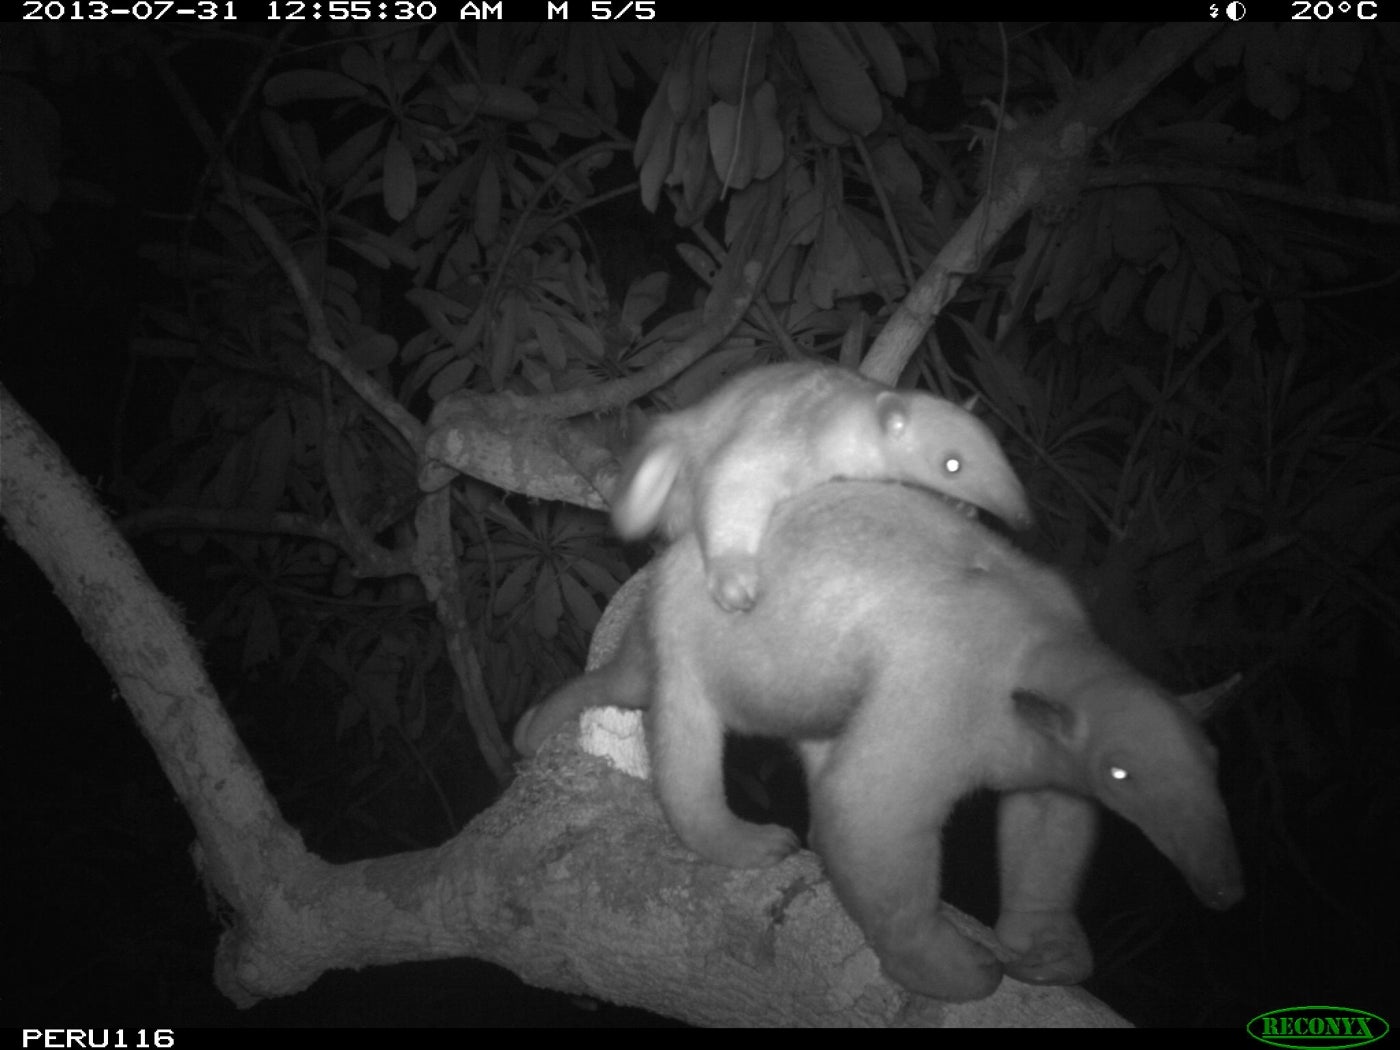 A nighttime camera trap photo of a tamanda (an animal that resembles an anteater, with a pointed snout, long tail and robust body) carries its baby on its back as it walks across a branch high in the treetops of the Peruvian rainforest.